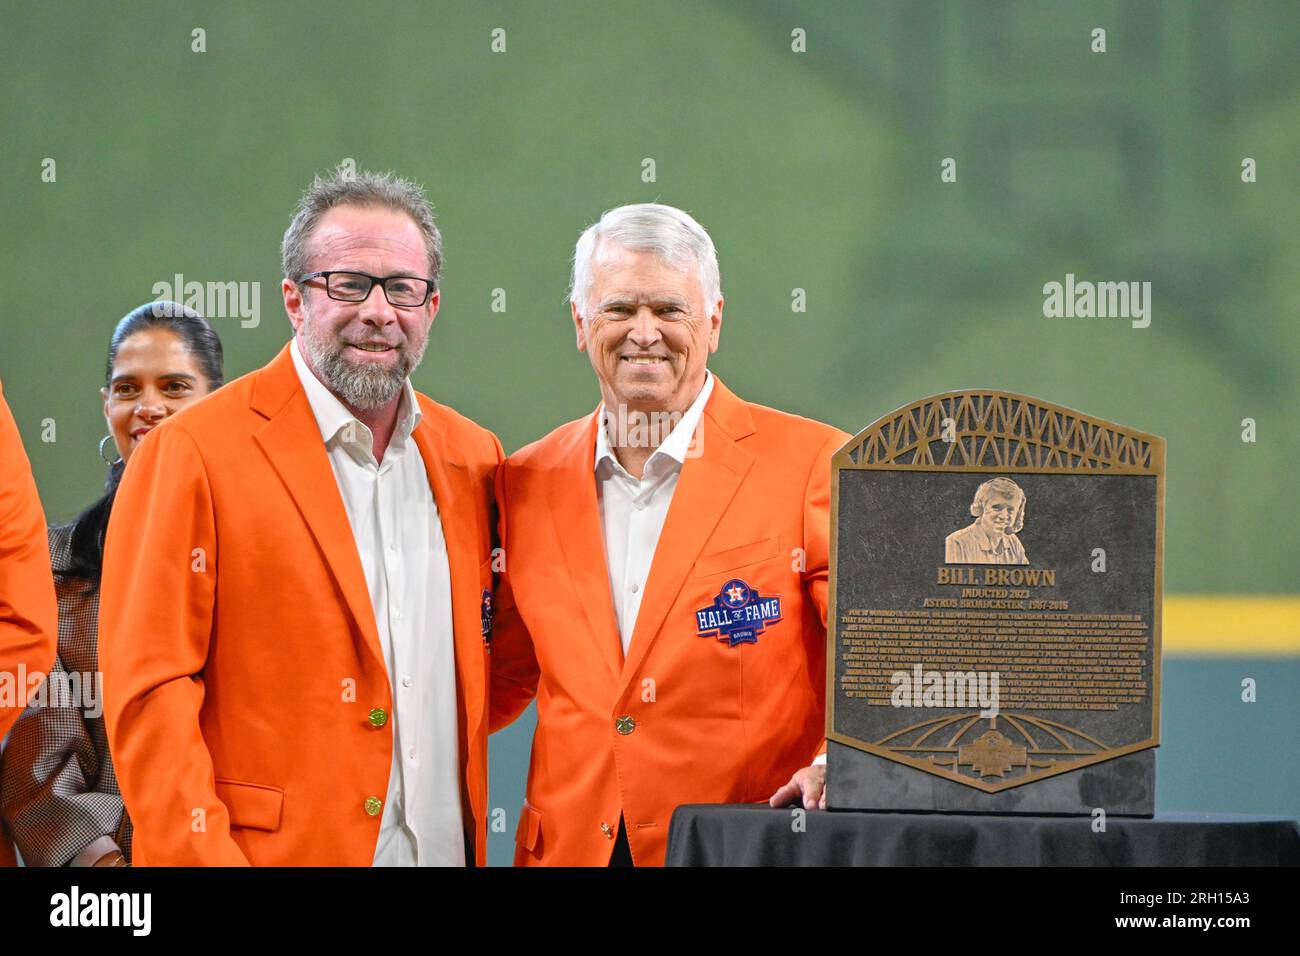 HOUSTON, TX - AUGUST 12: Hall of Famer Jeff Bagwell poses with legendary  sportscaster Bill Brown during his induction into the Astros Hall of Fame  before the baseball game between the Los